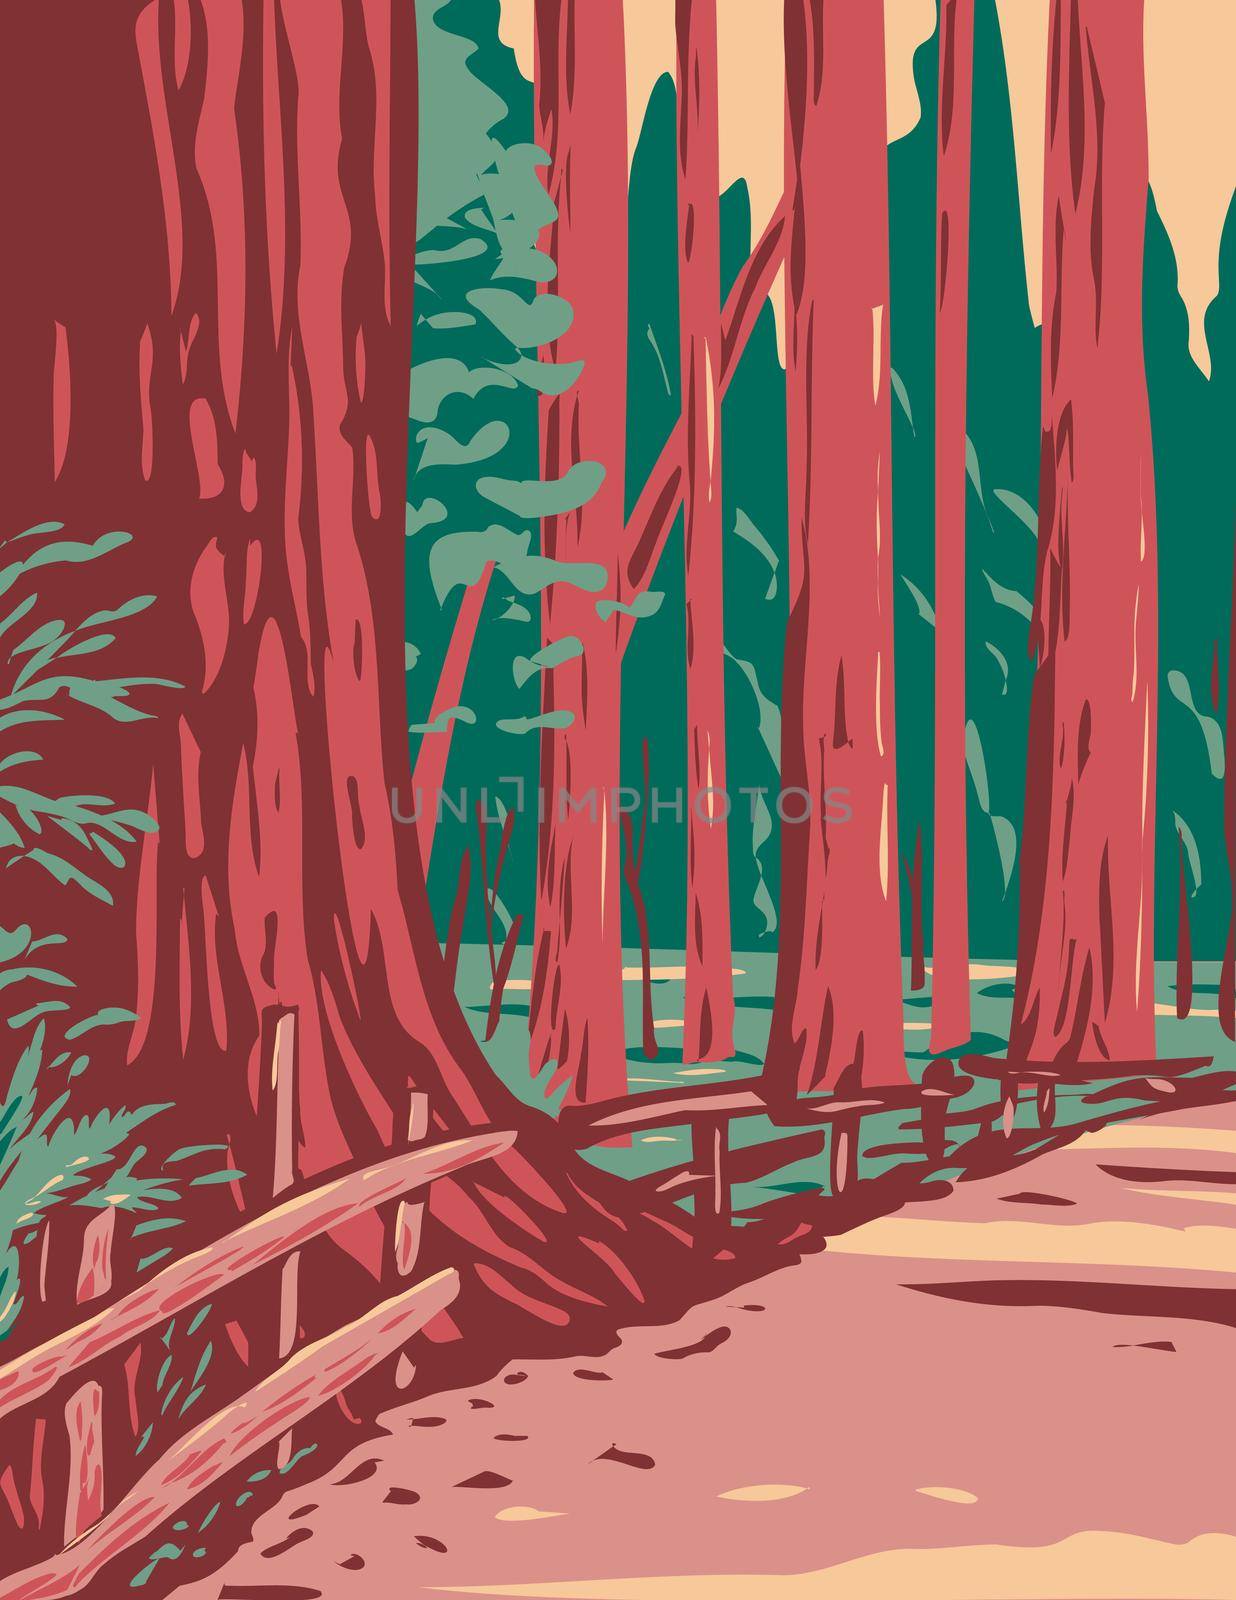 WPA Poster Art of redwoods in the Avenue of the Giants surrounded by the Humboldt Redwoods State Park located in Arcata California done in works project administration style.